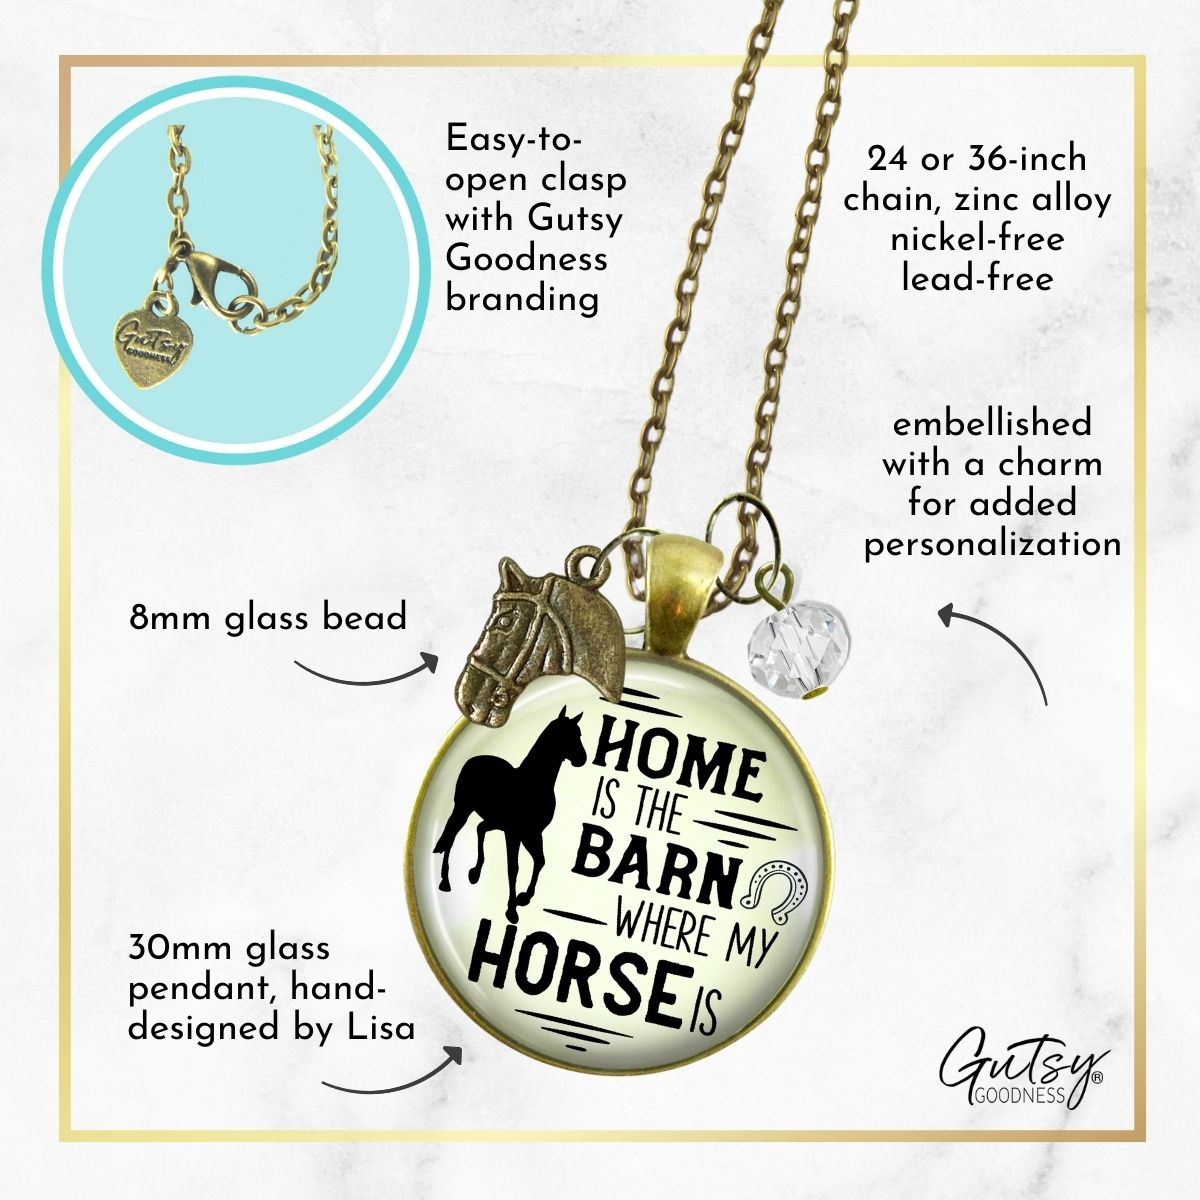 Handmade Gutsy Goodness Jewelry Home Is The Barn Where My Horse Is Necklace Western Boho Country Girl Charm Jewelry & Card